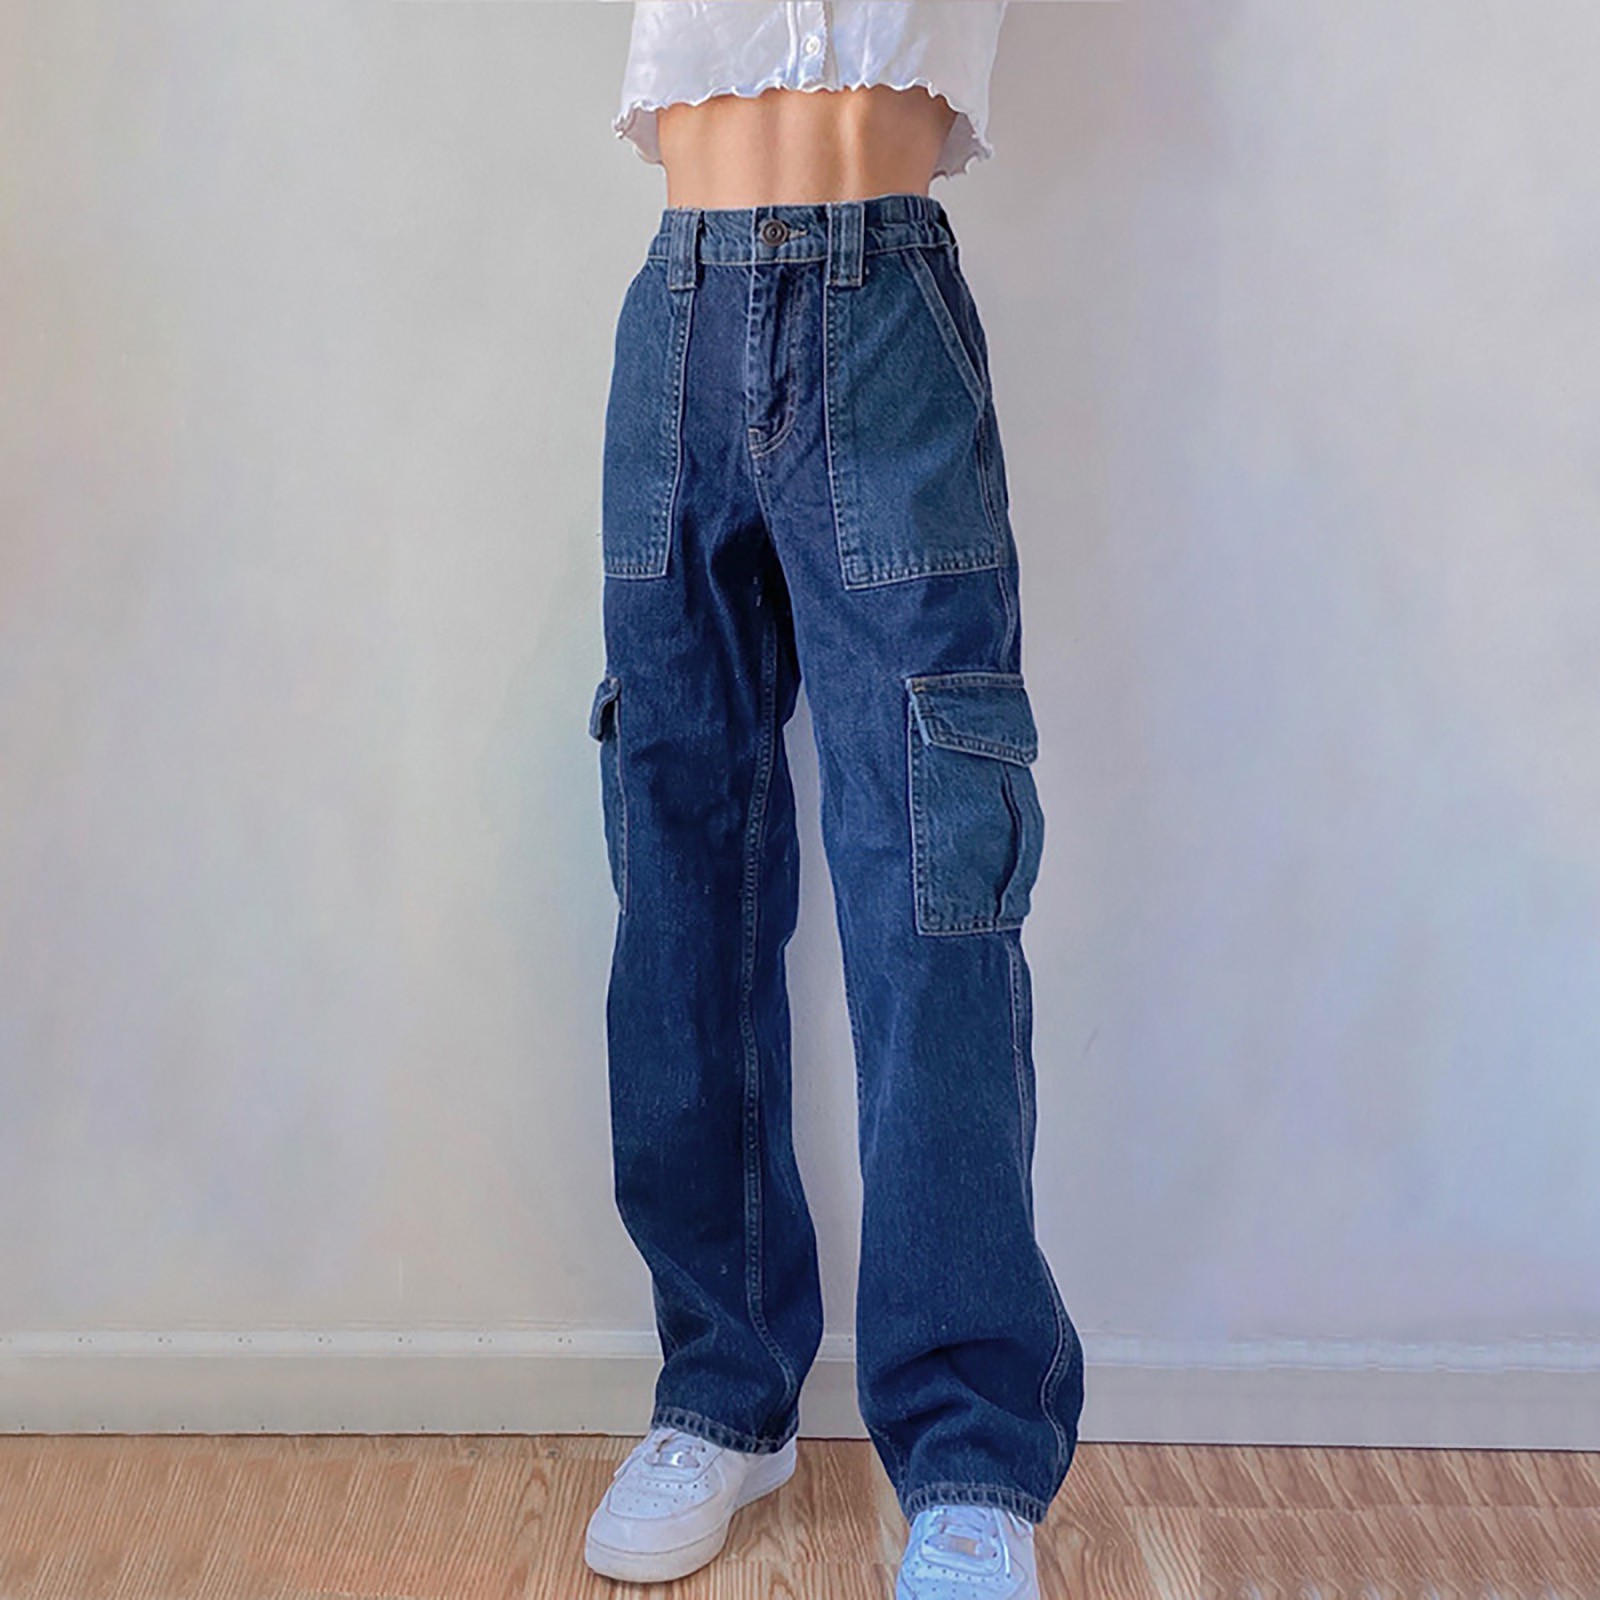 Mchoice Y2K Fashion Jeans for Women High Waist Straight Leg Pants Color Block Baggy Denim Jeans Trousers Vintage Streetwear on Clearance - image 4 of 7